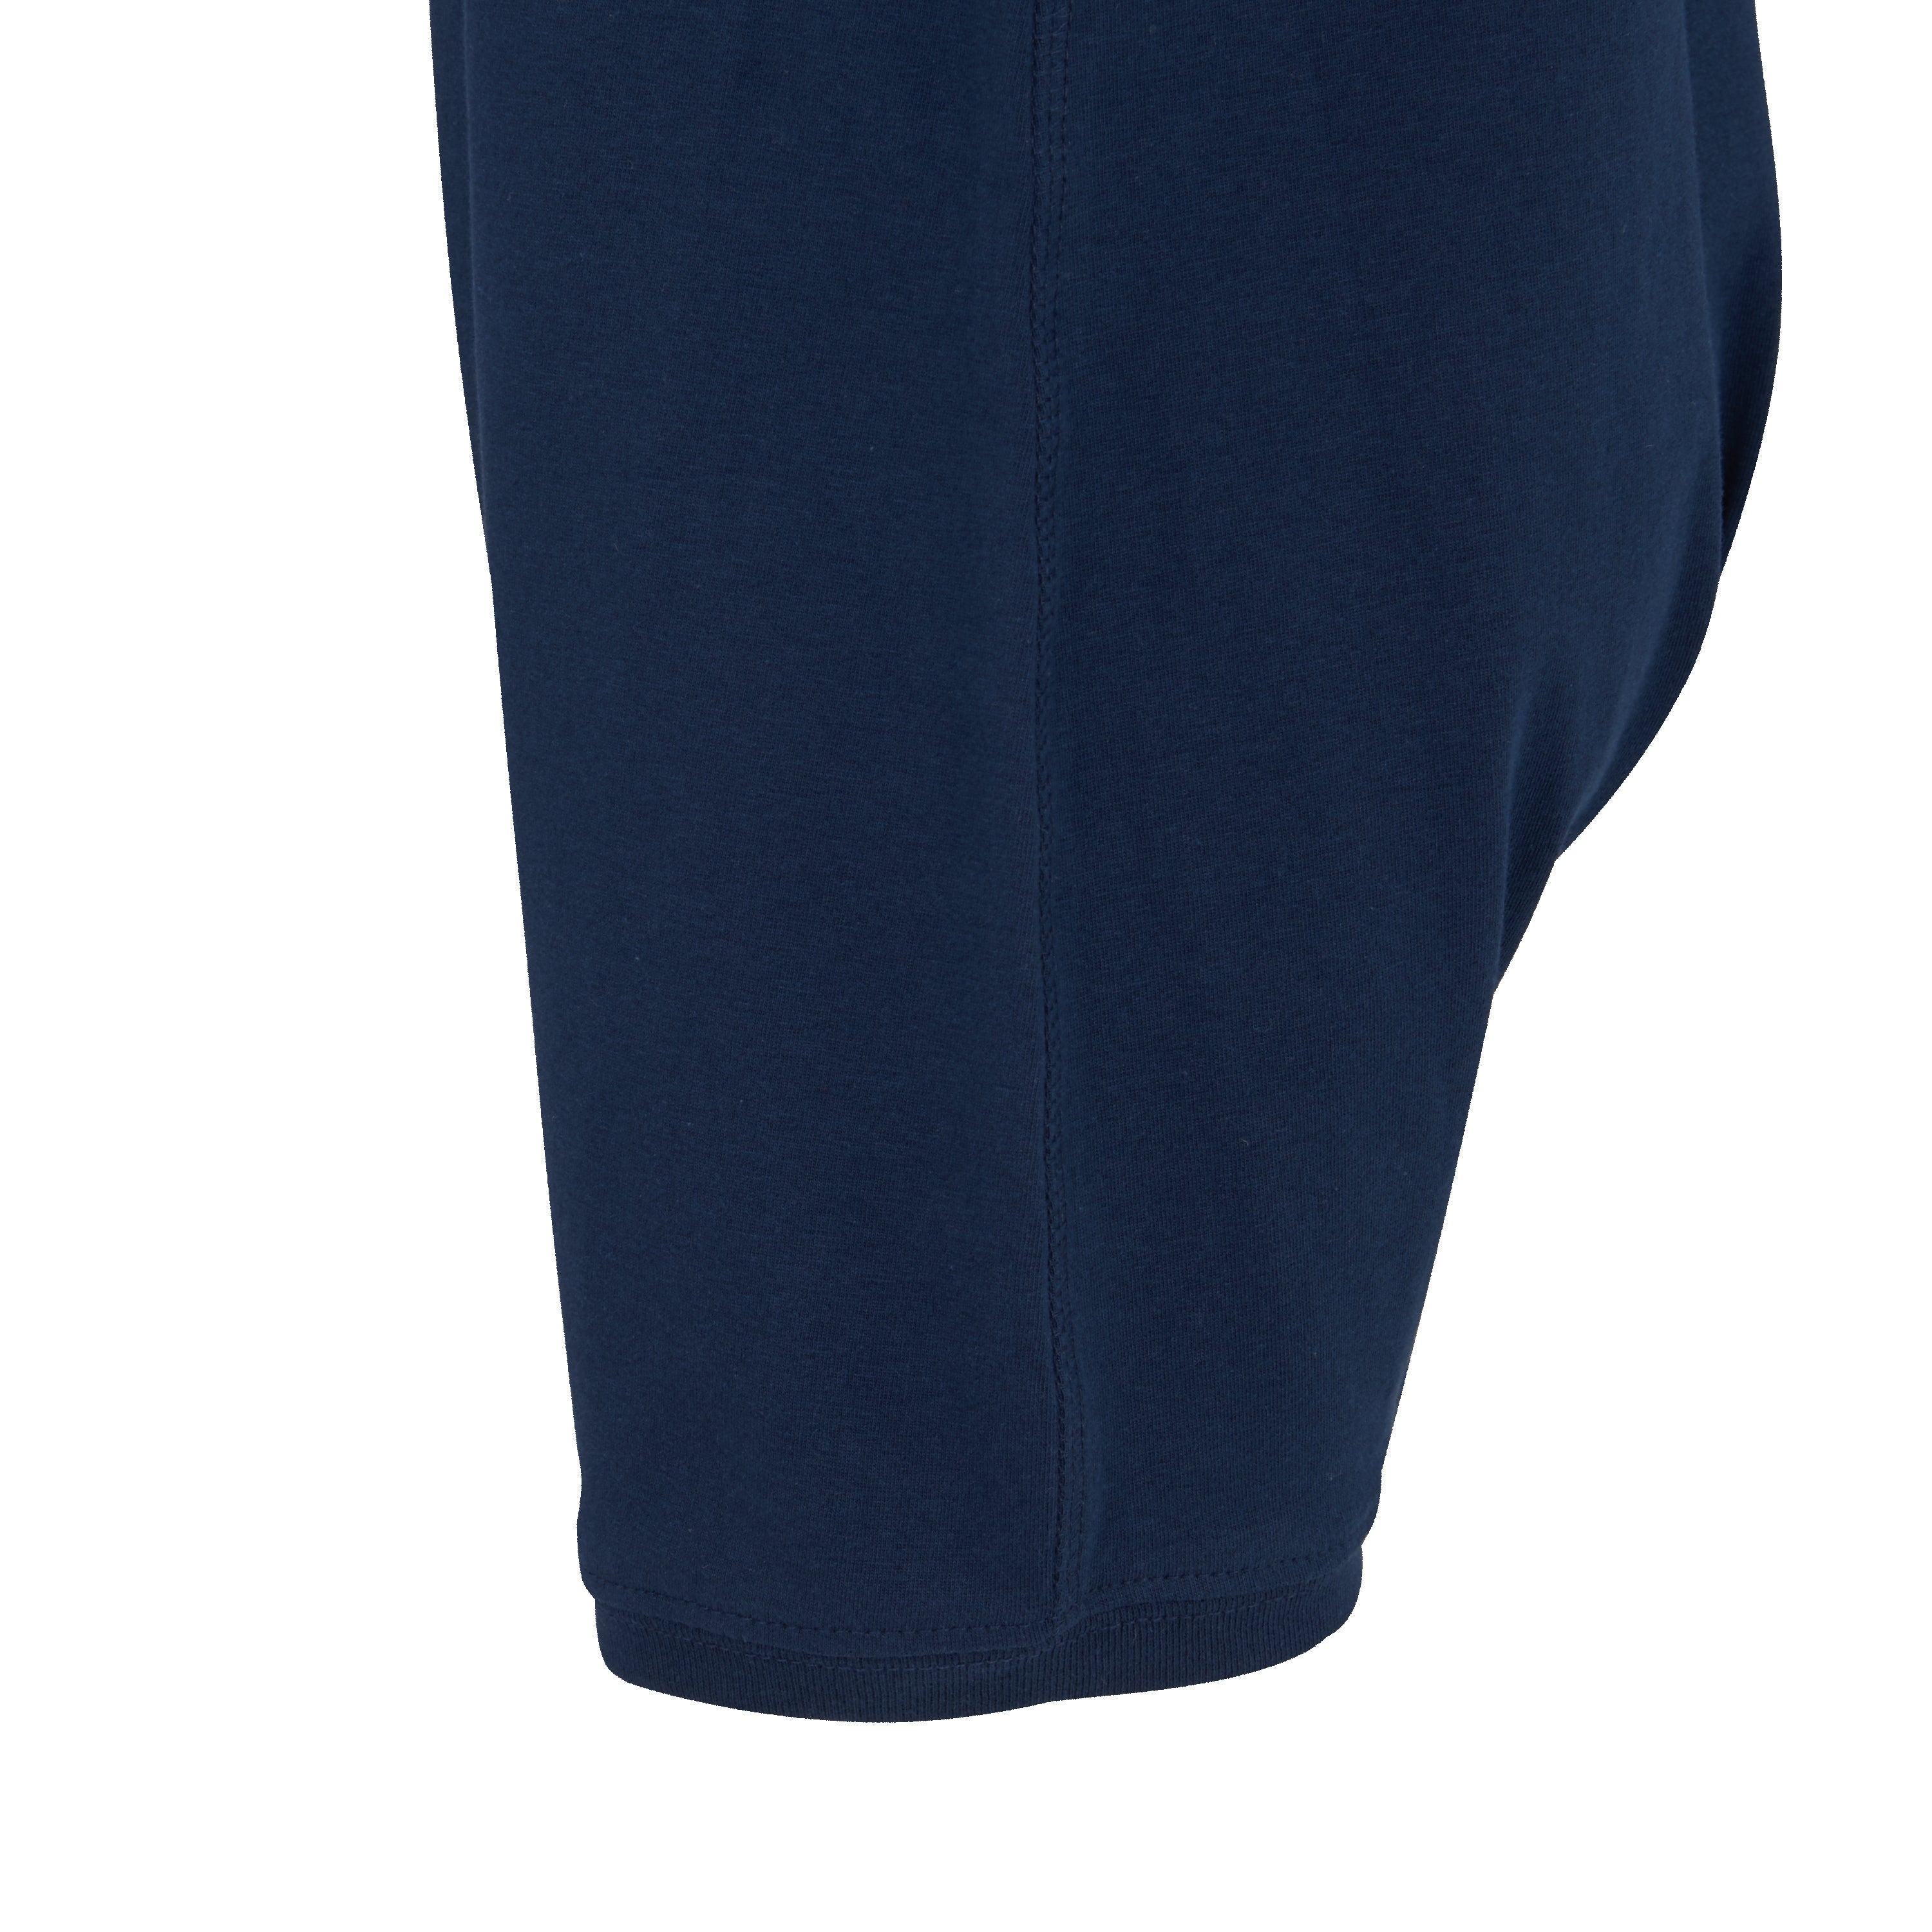 KayCey_Adaptive_clothing_for_older_children_with_special_needs_Longer_leg_Navy